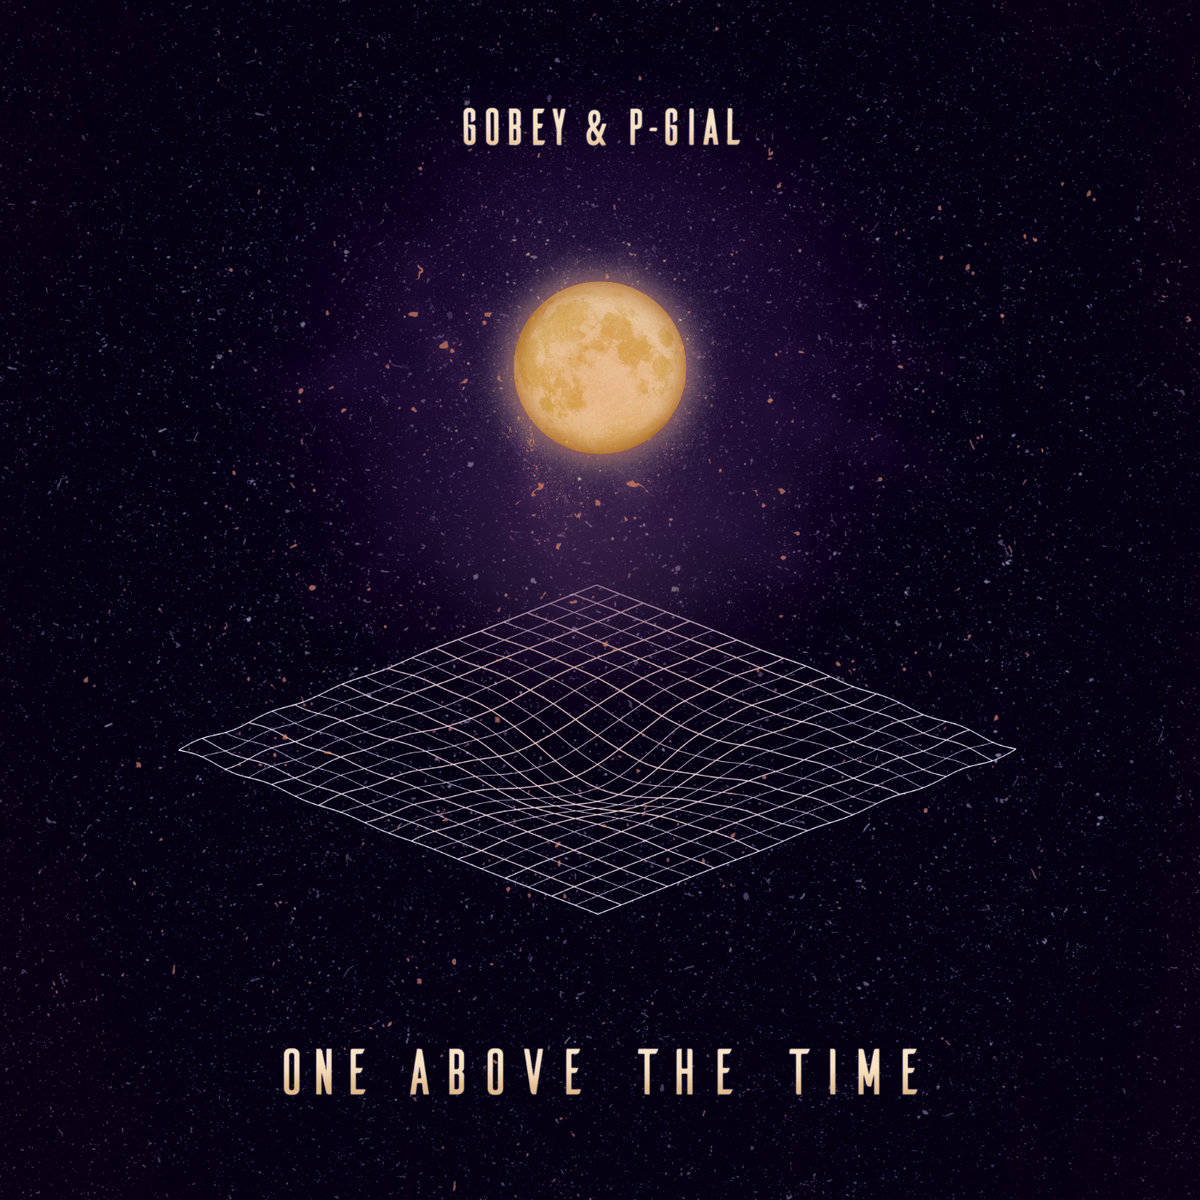 Gobey & P-Gial - One Above The Time - Self Release (Vinyl & Digital)